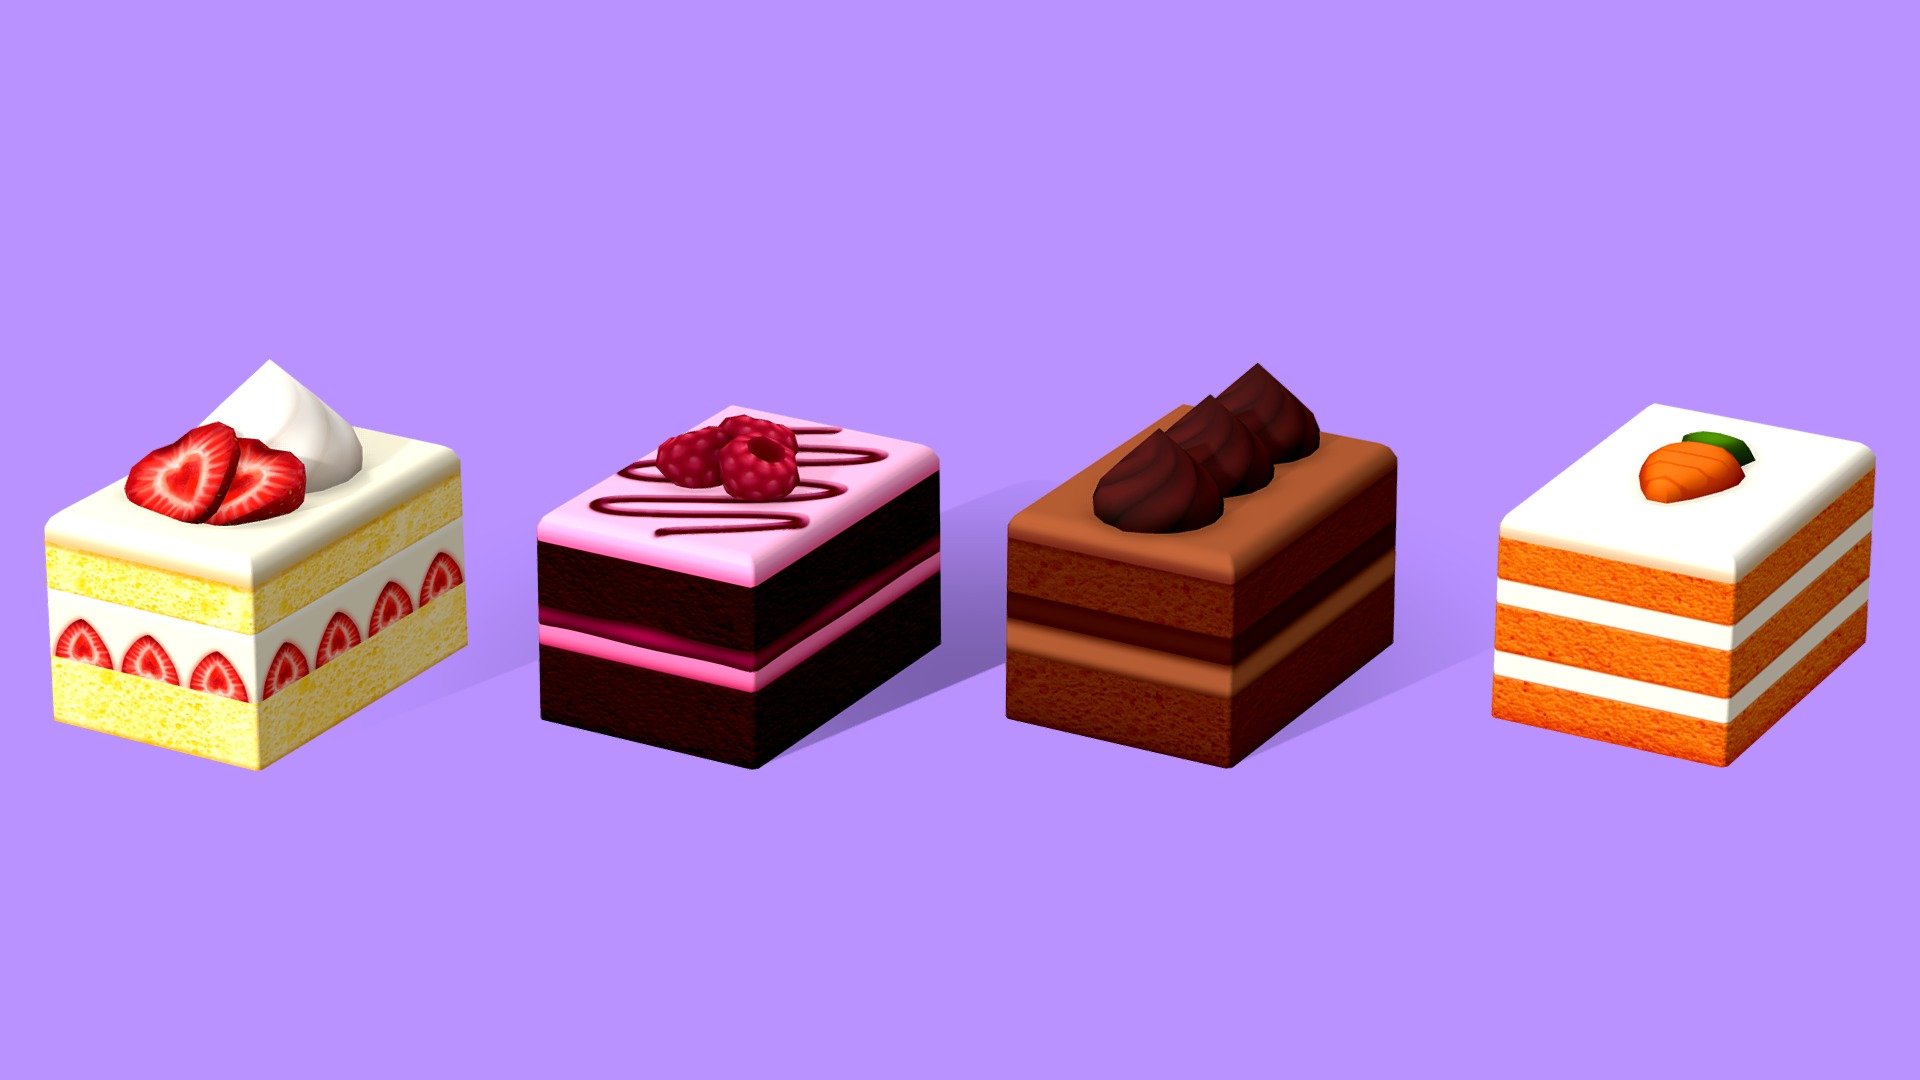 Fancy french style cakes, perfect for a cafe or bakery!




Four styles of cake - shortcake, raspberry, chocolate and carrot

1024x1024 diffuse texture maps that can be used both lit and unlit

Lowpoly and handpainted textures

Modeled in Maya and painted in Photoshop

Be sure to check out my other assets! Every asset is modeled and painted in the same style so your game or project will maintain a cohesive and unique style with a wide variety of assets to choose from! - Fancy Cakes - Buy Royalty Free 3D model by Megan Alcock (@citystreetlight) 3d model